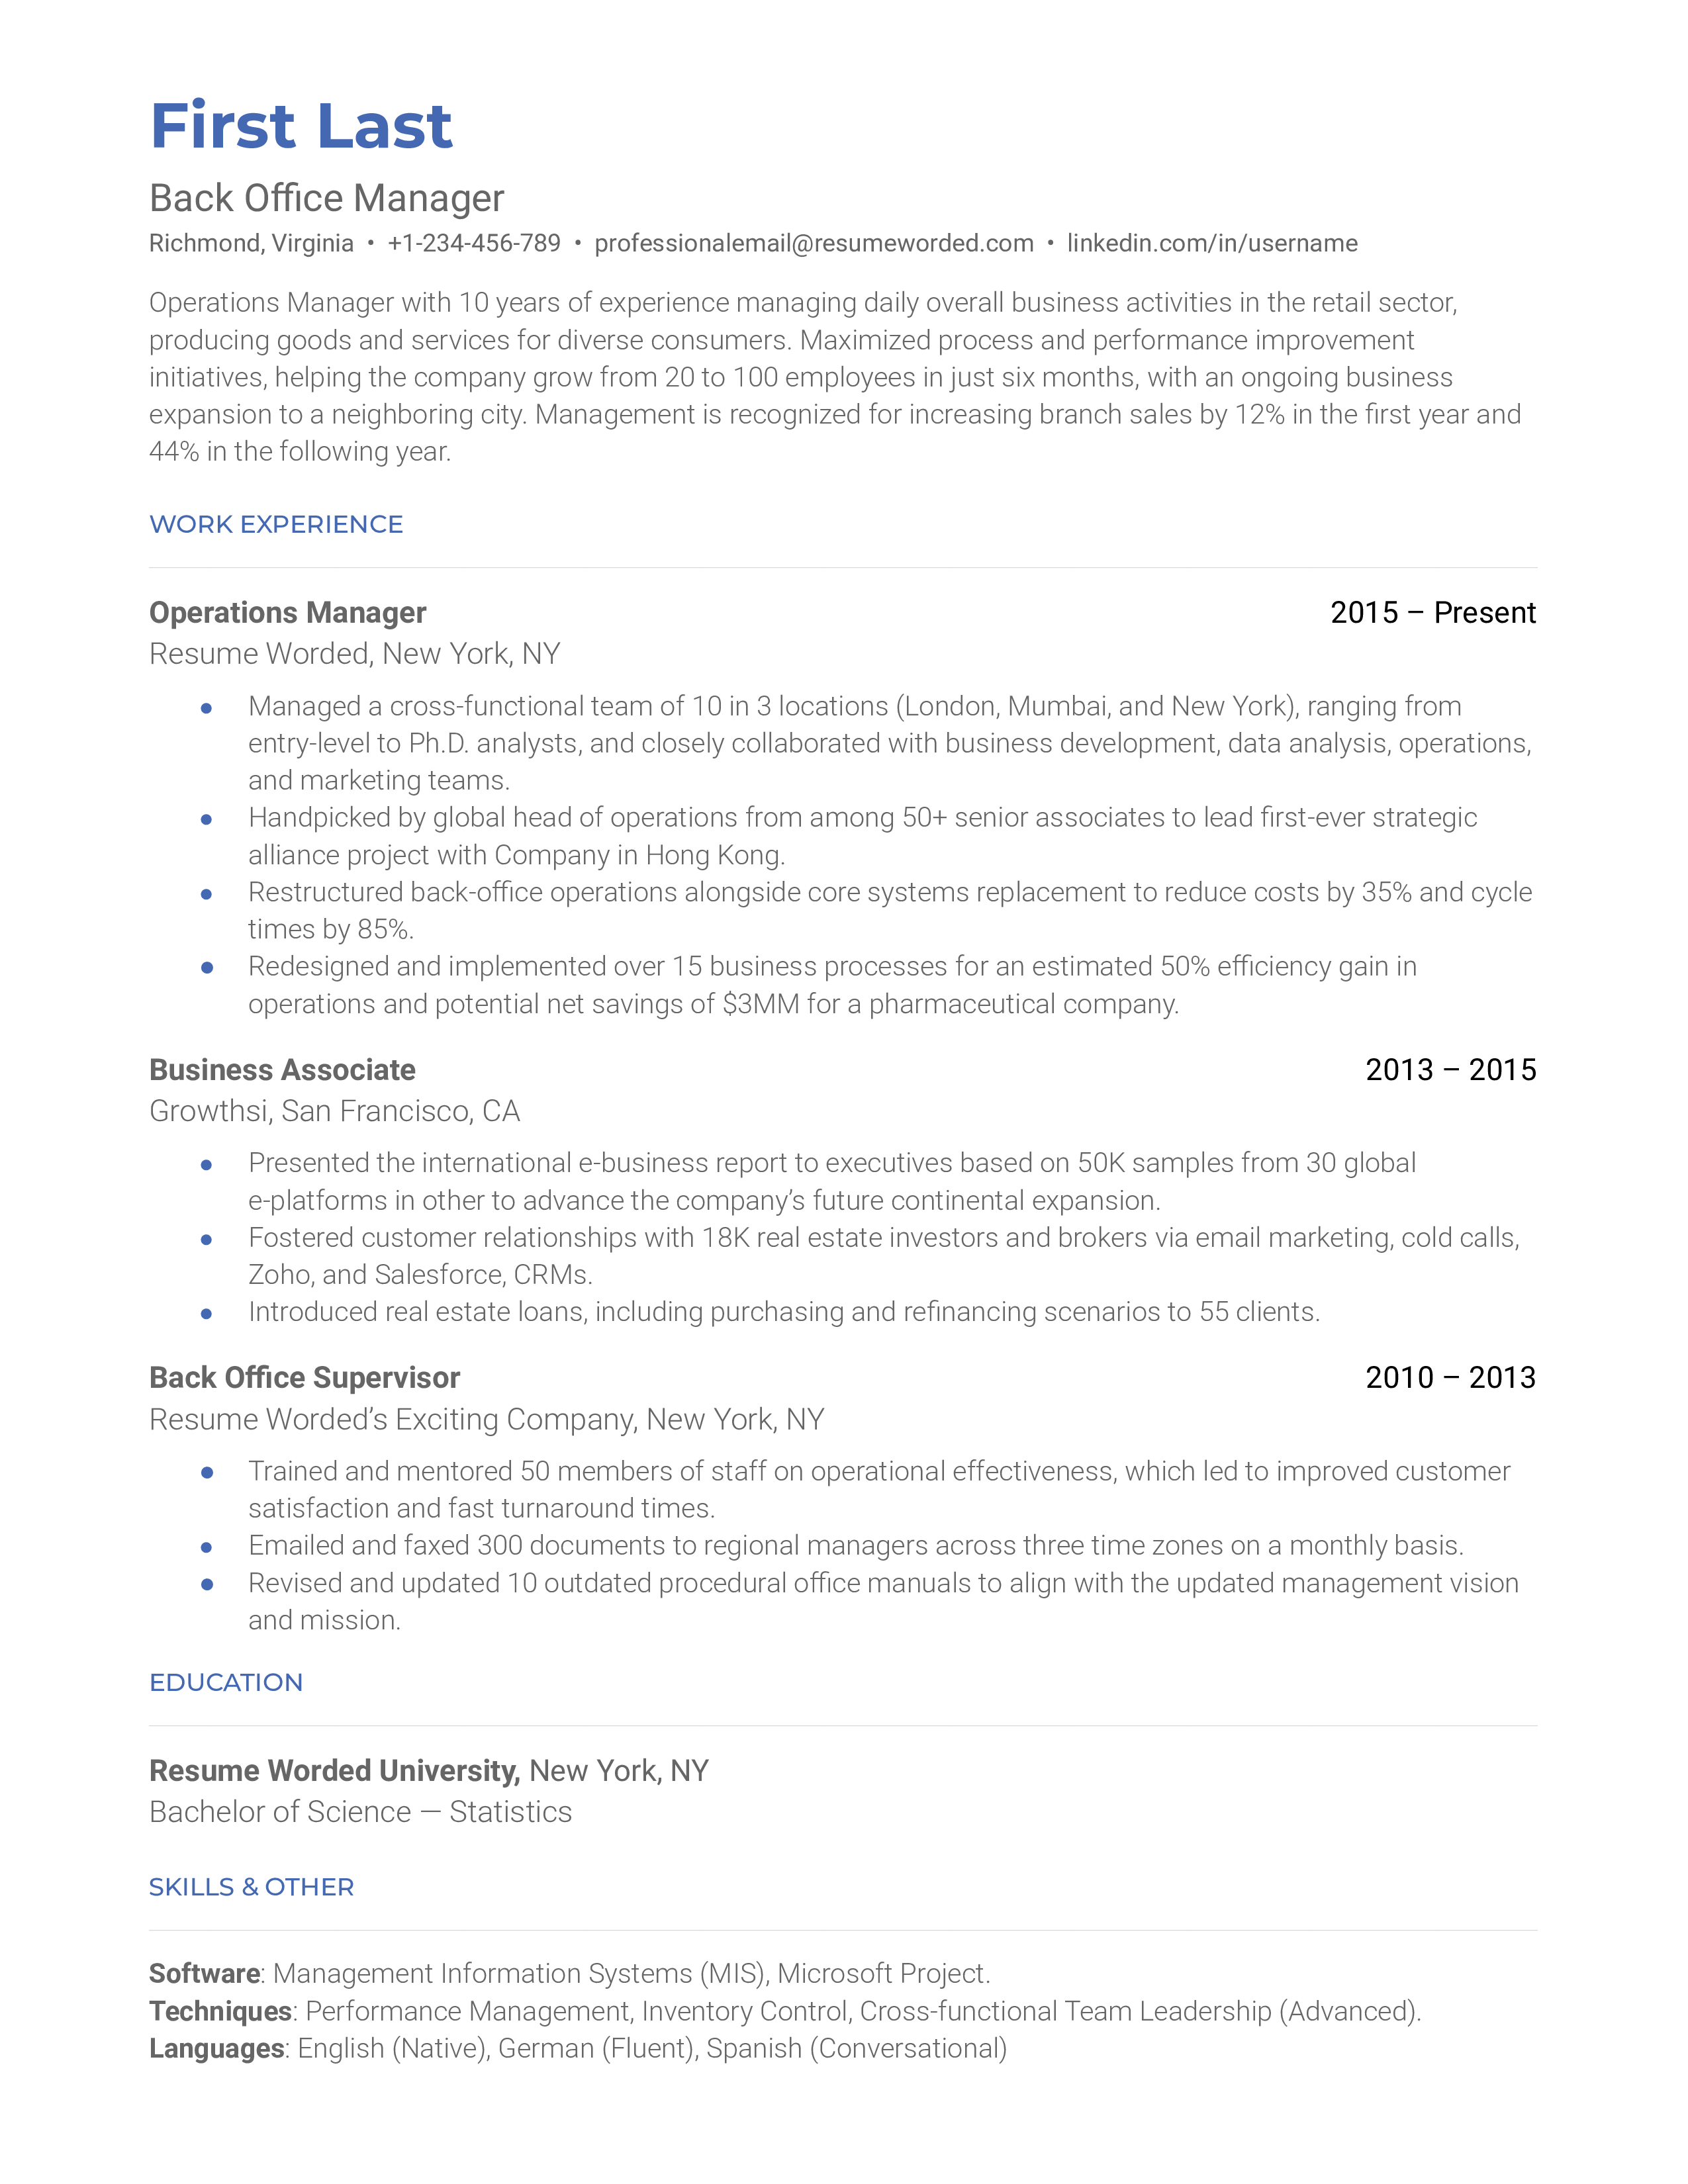 A well-structured CV for a Back Office Manager role